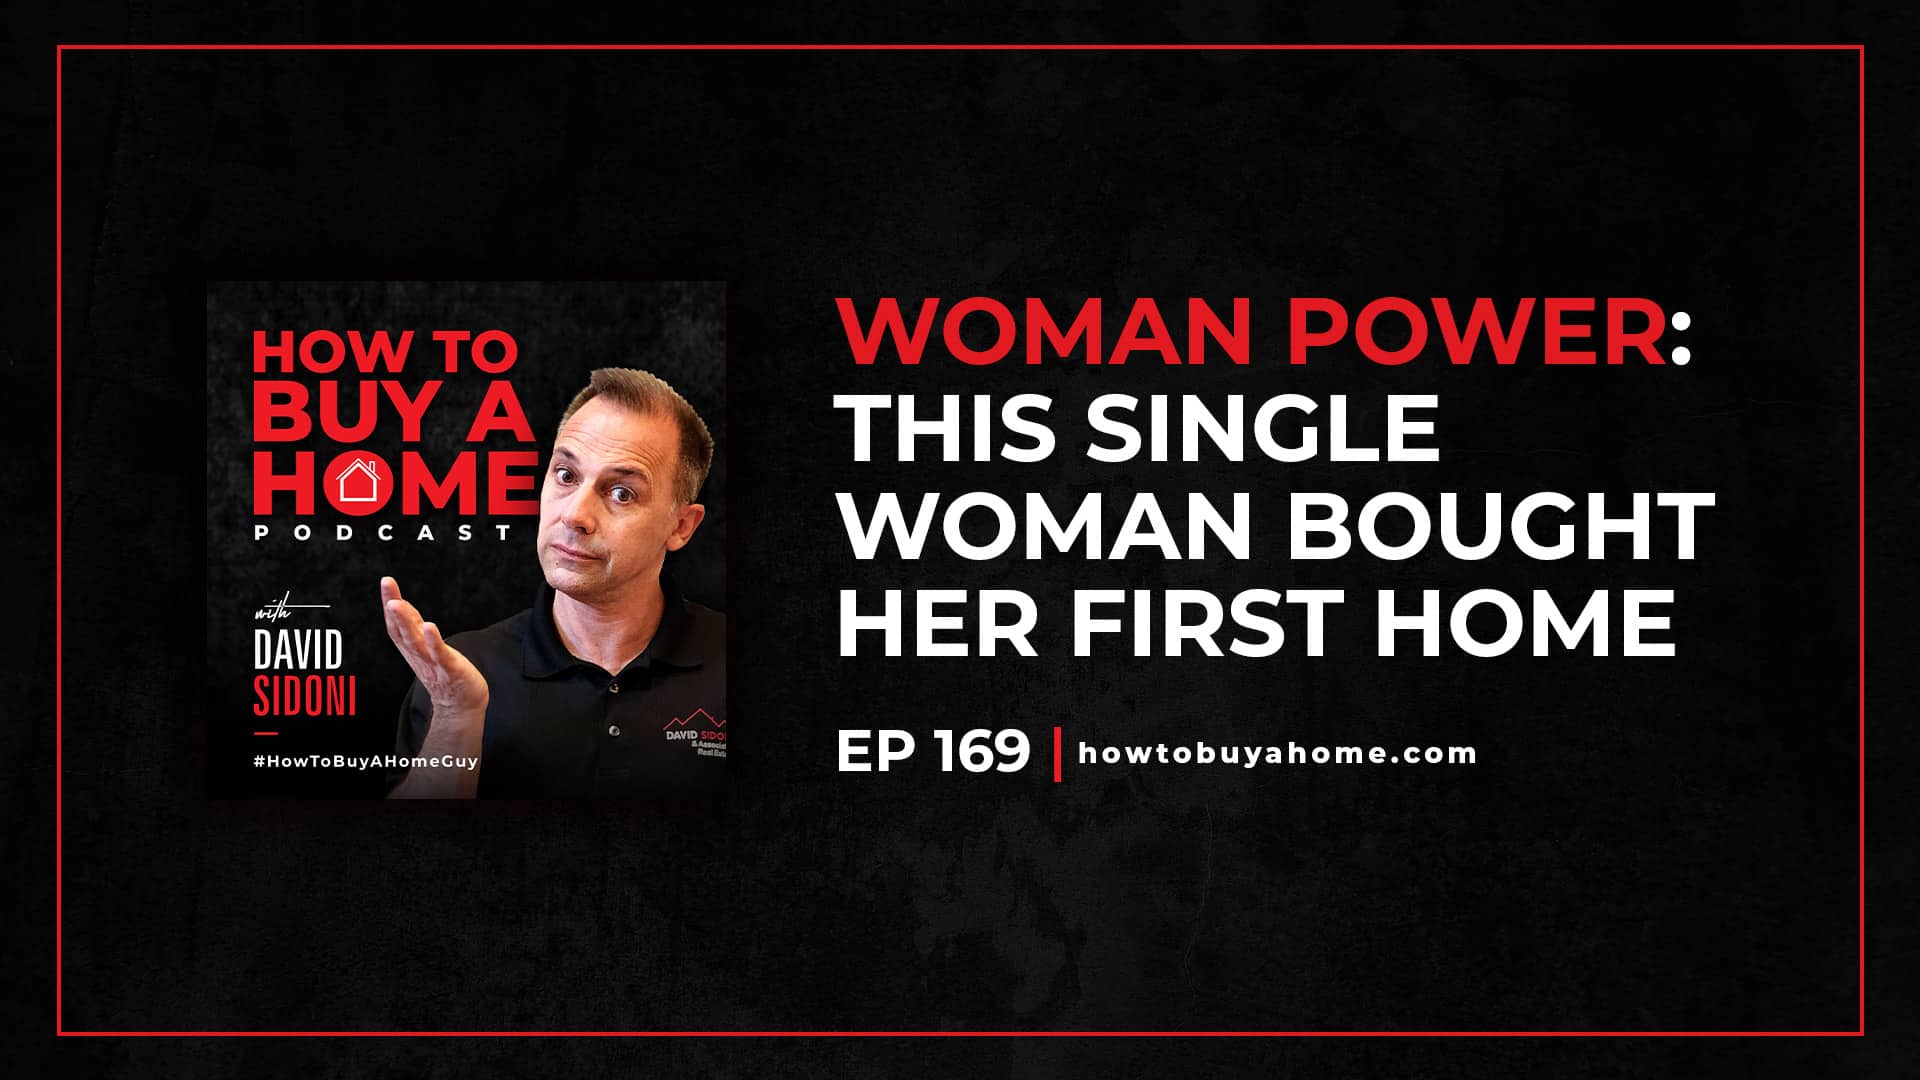 Ep. 169 – Interview A single woman takes control and buys her first home on her own